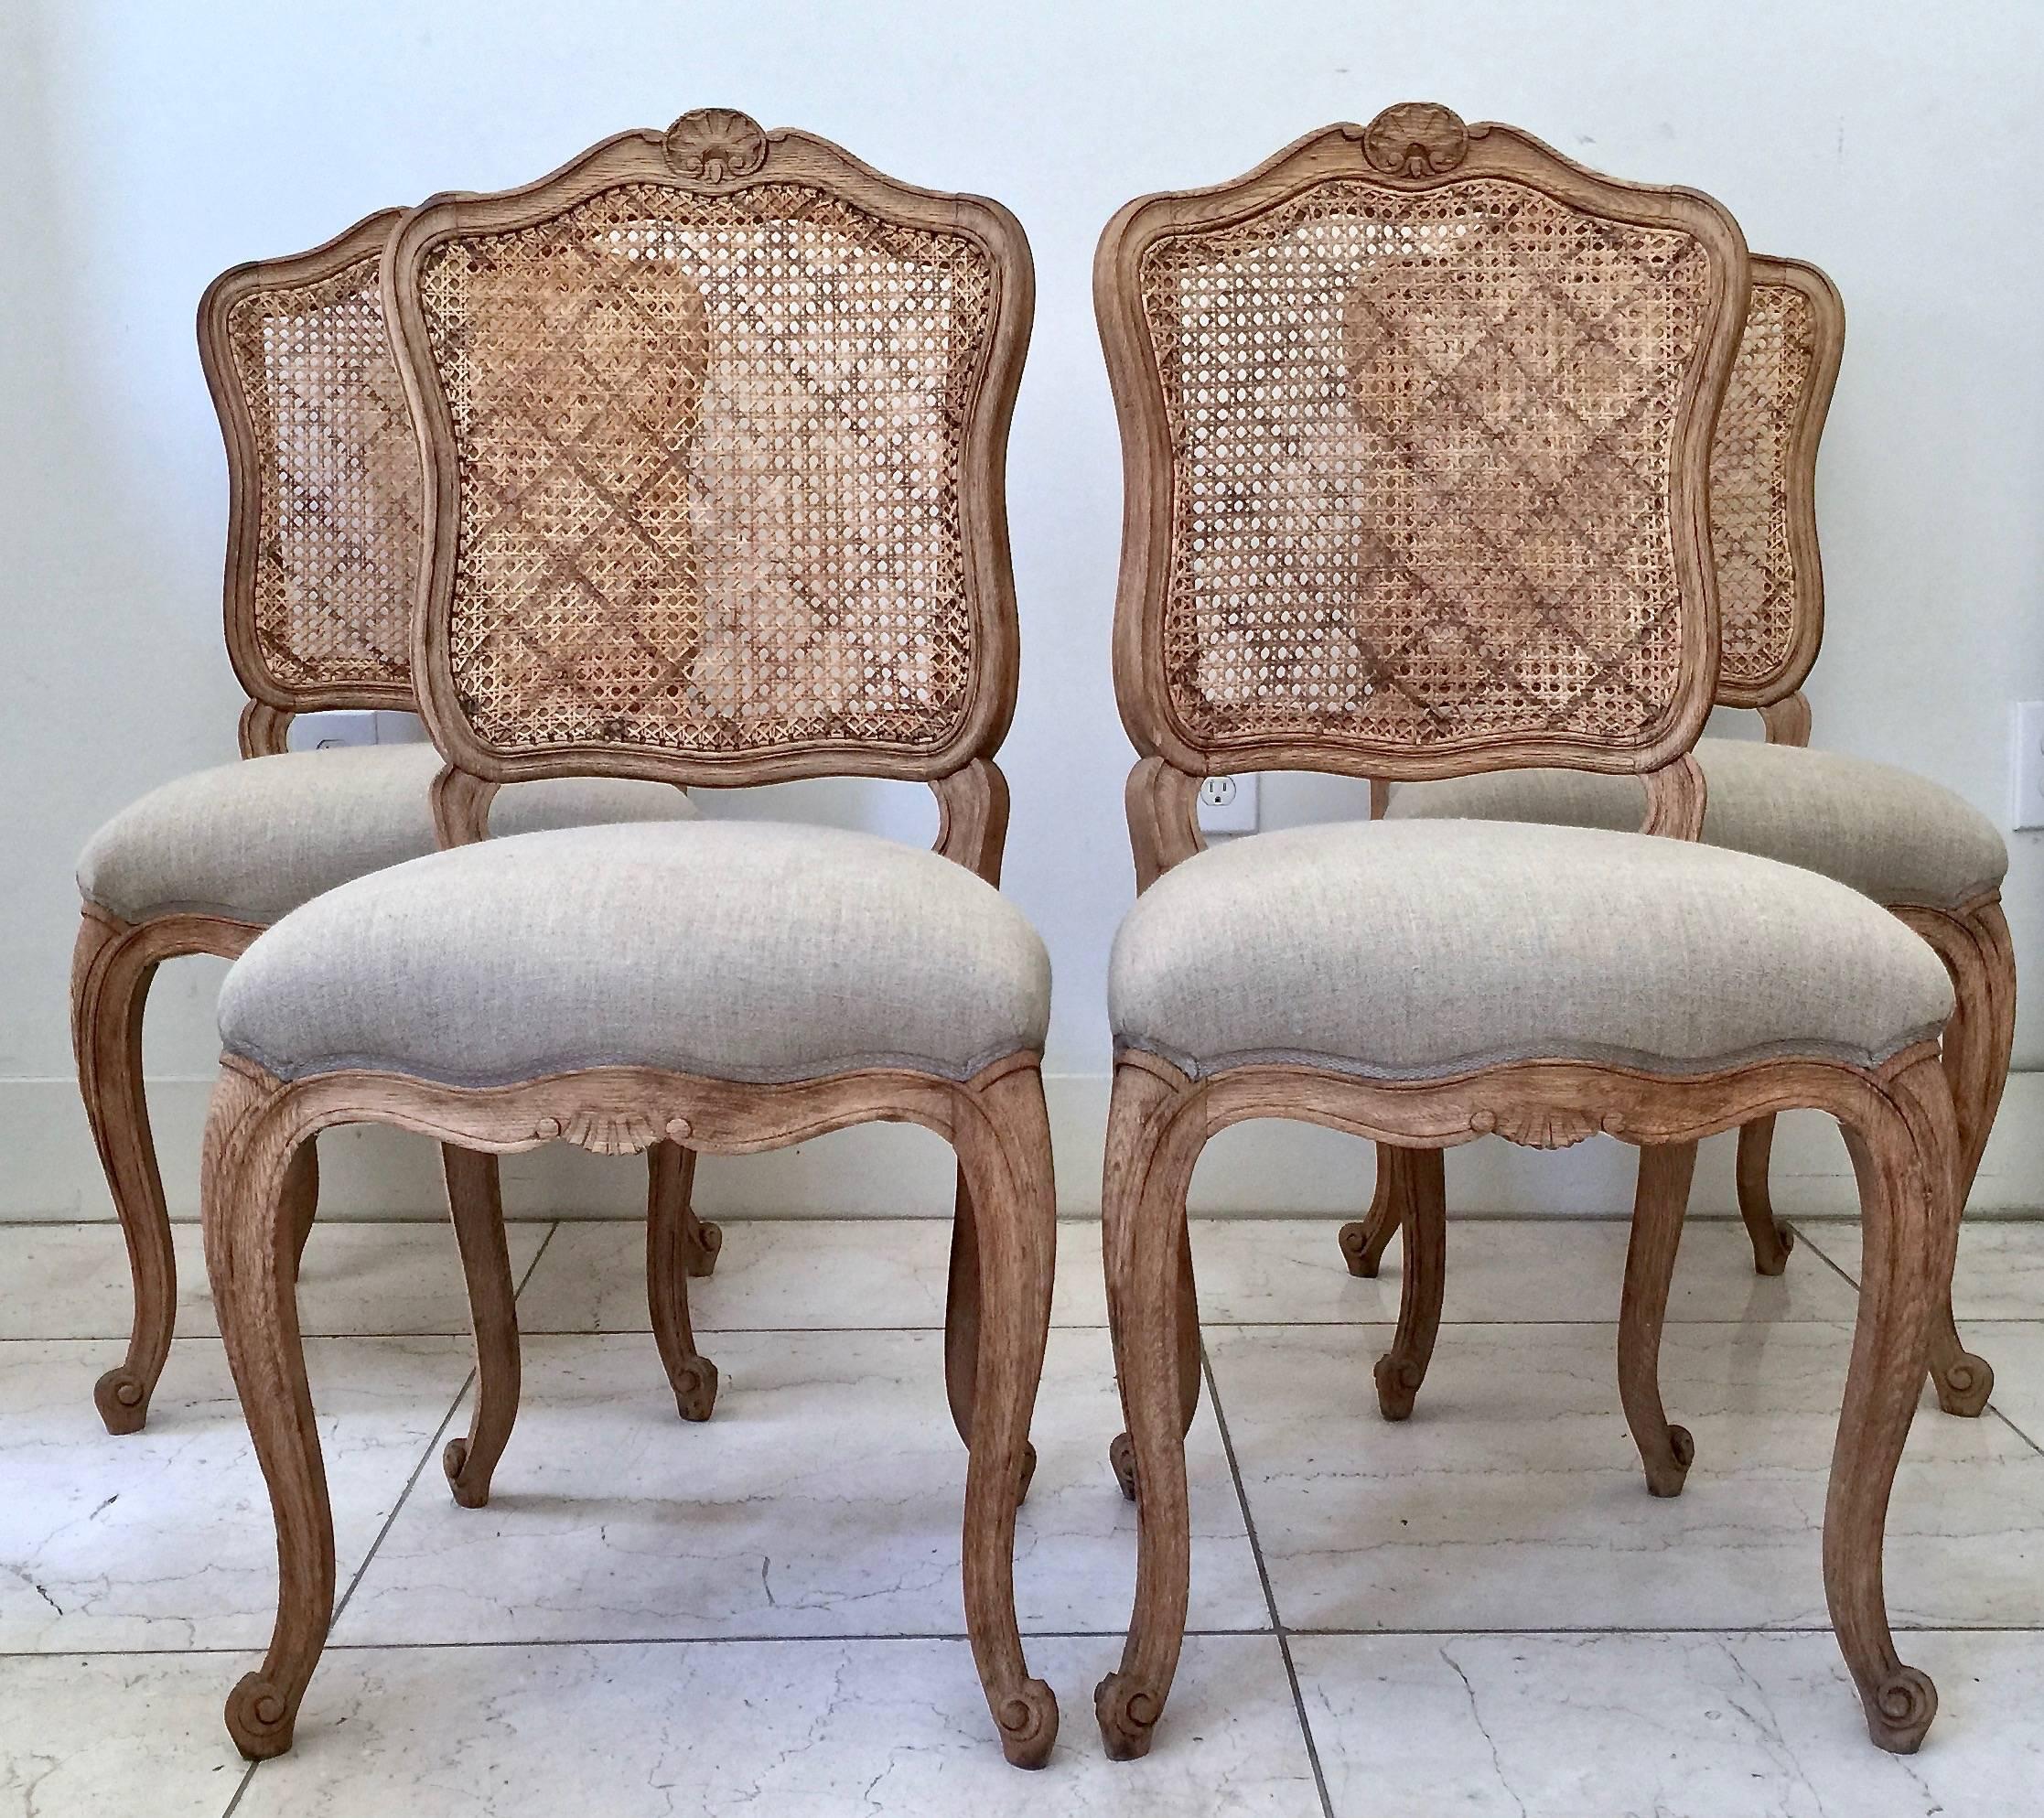 Hand-Carved Set of Four French, LXV Style Chairs with Cane Back